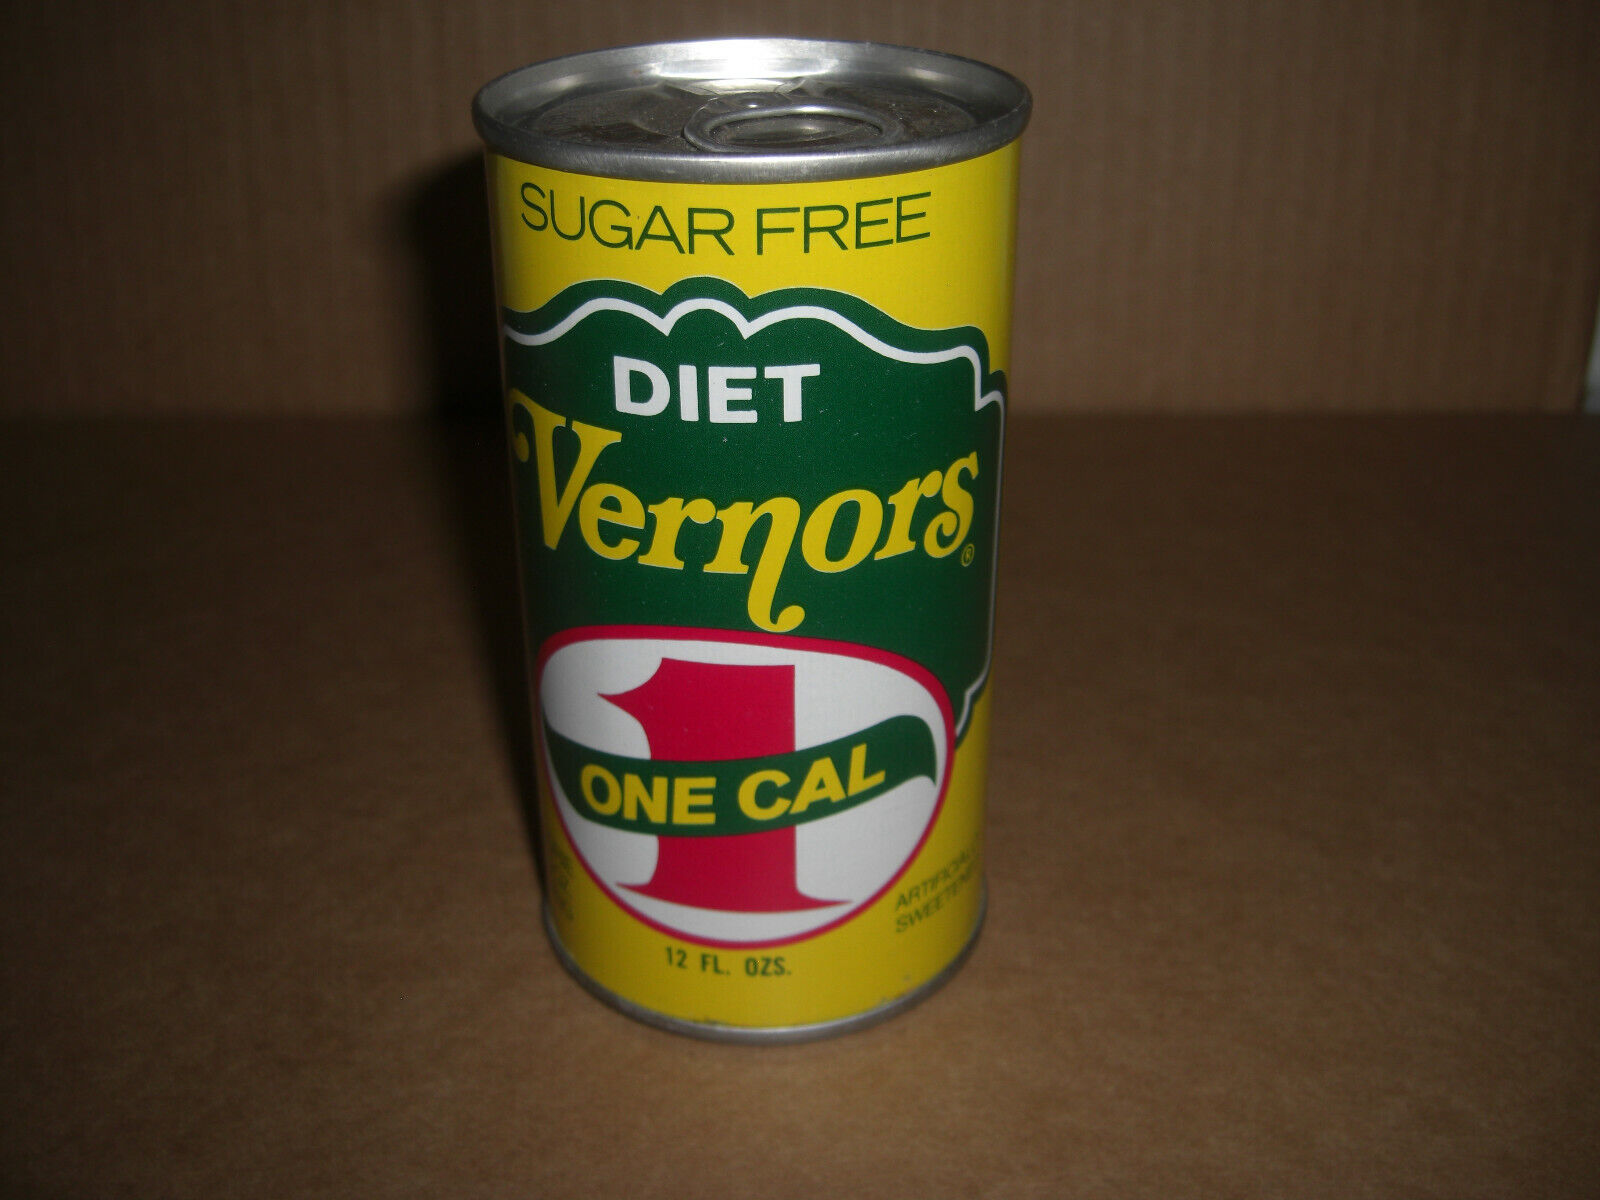 Sugar Free Diet Vernors One Cal Soda S/S Can 